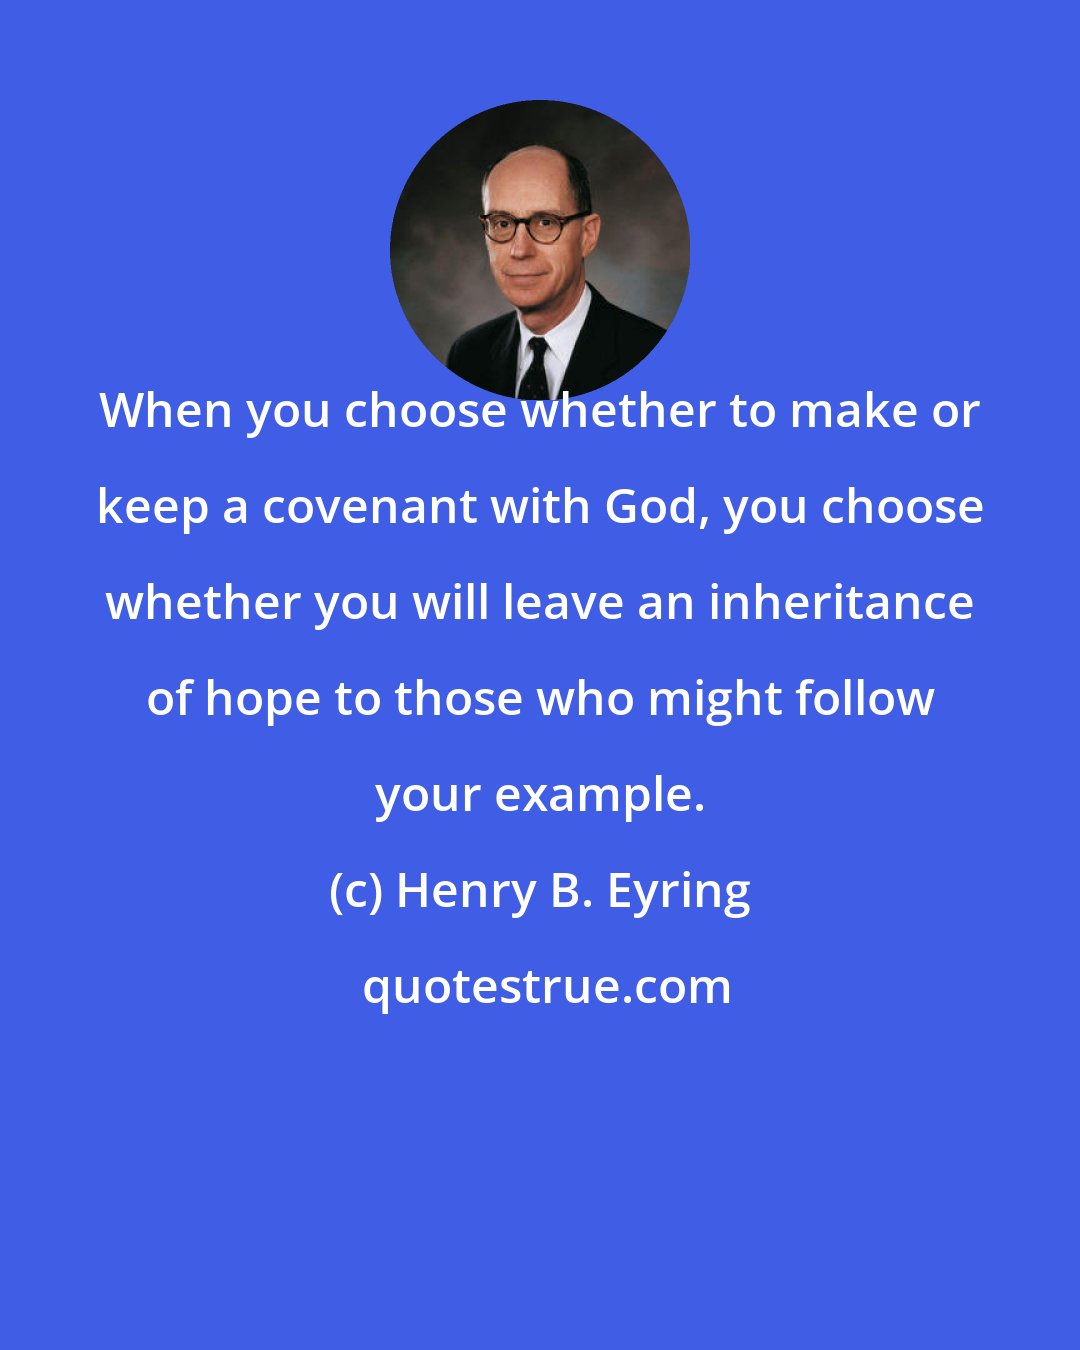 Henry B. Eyring: When you choose whether to make or keep a covenant with God, you choose whether you will leave an inheritance of hope to those who might follow your example.